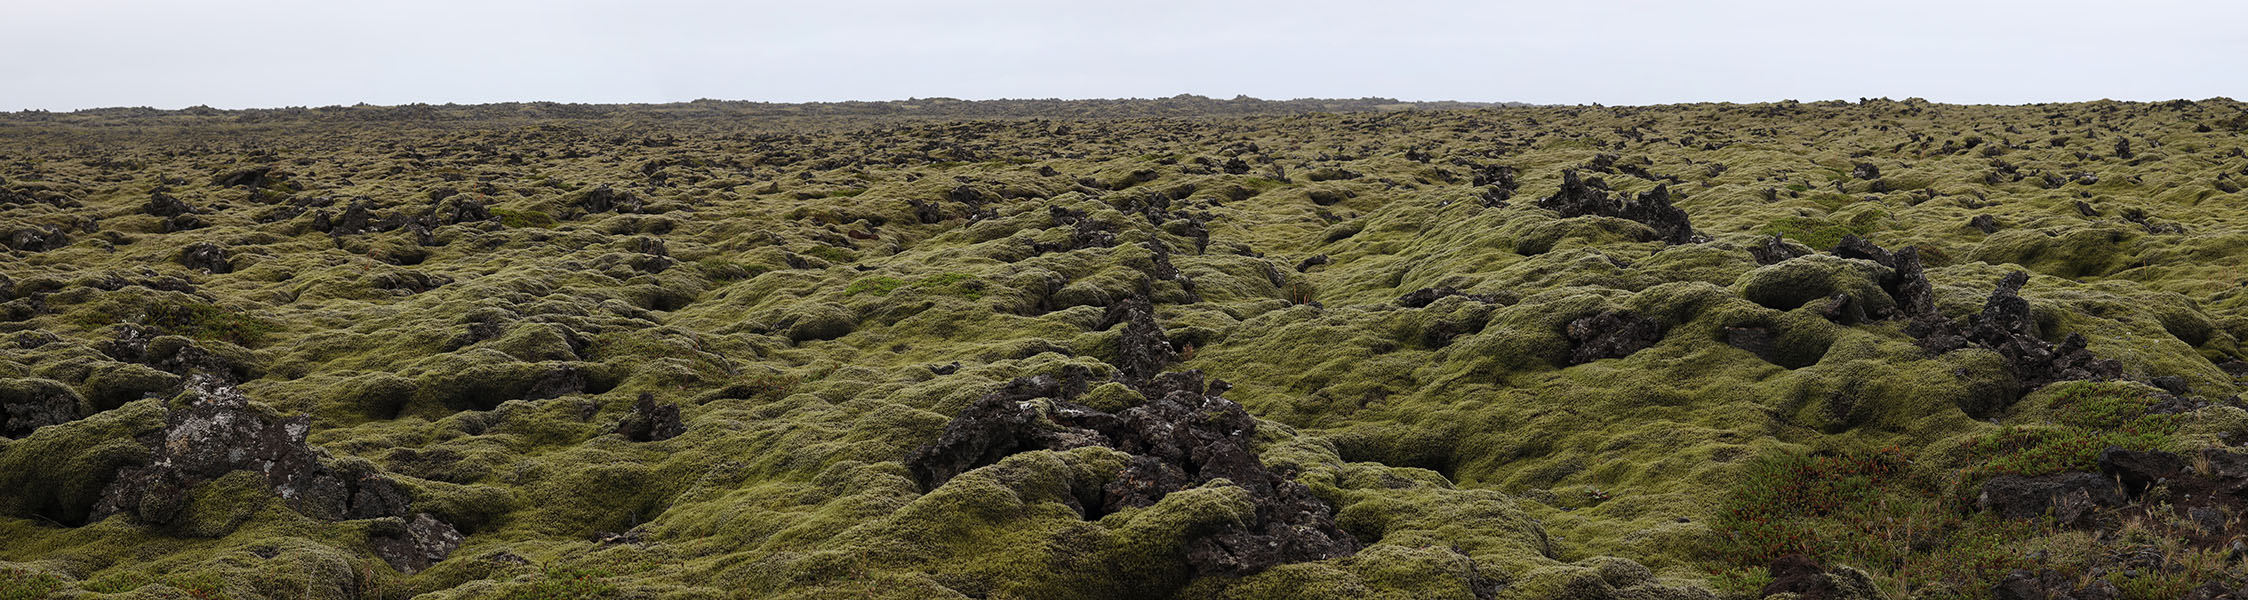 Cloudy Day Photo of Jagged Lava Field in Iceland Covered with Thick Softening Moss.